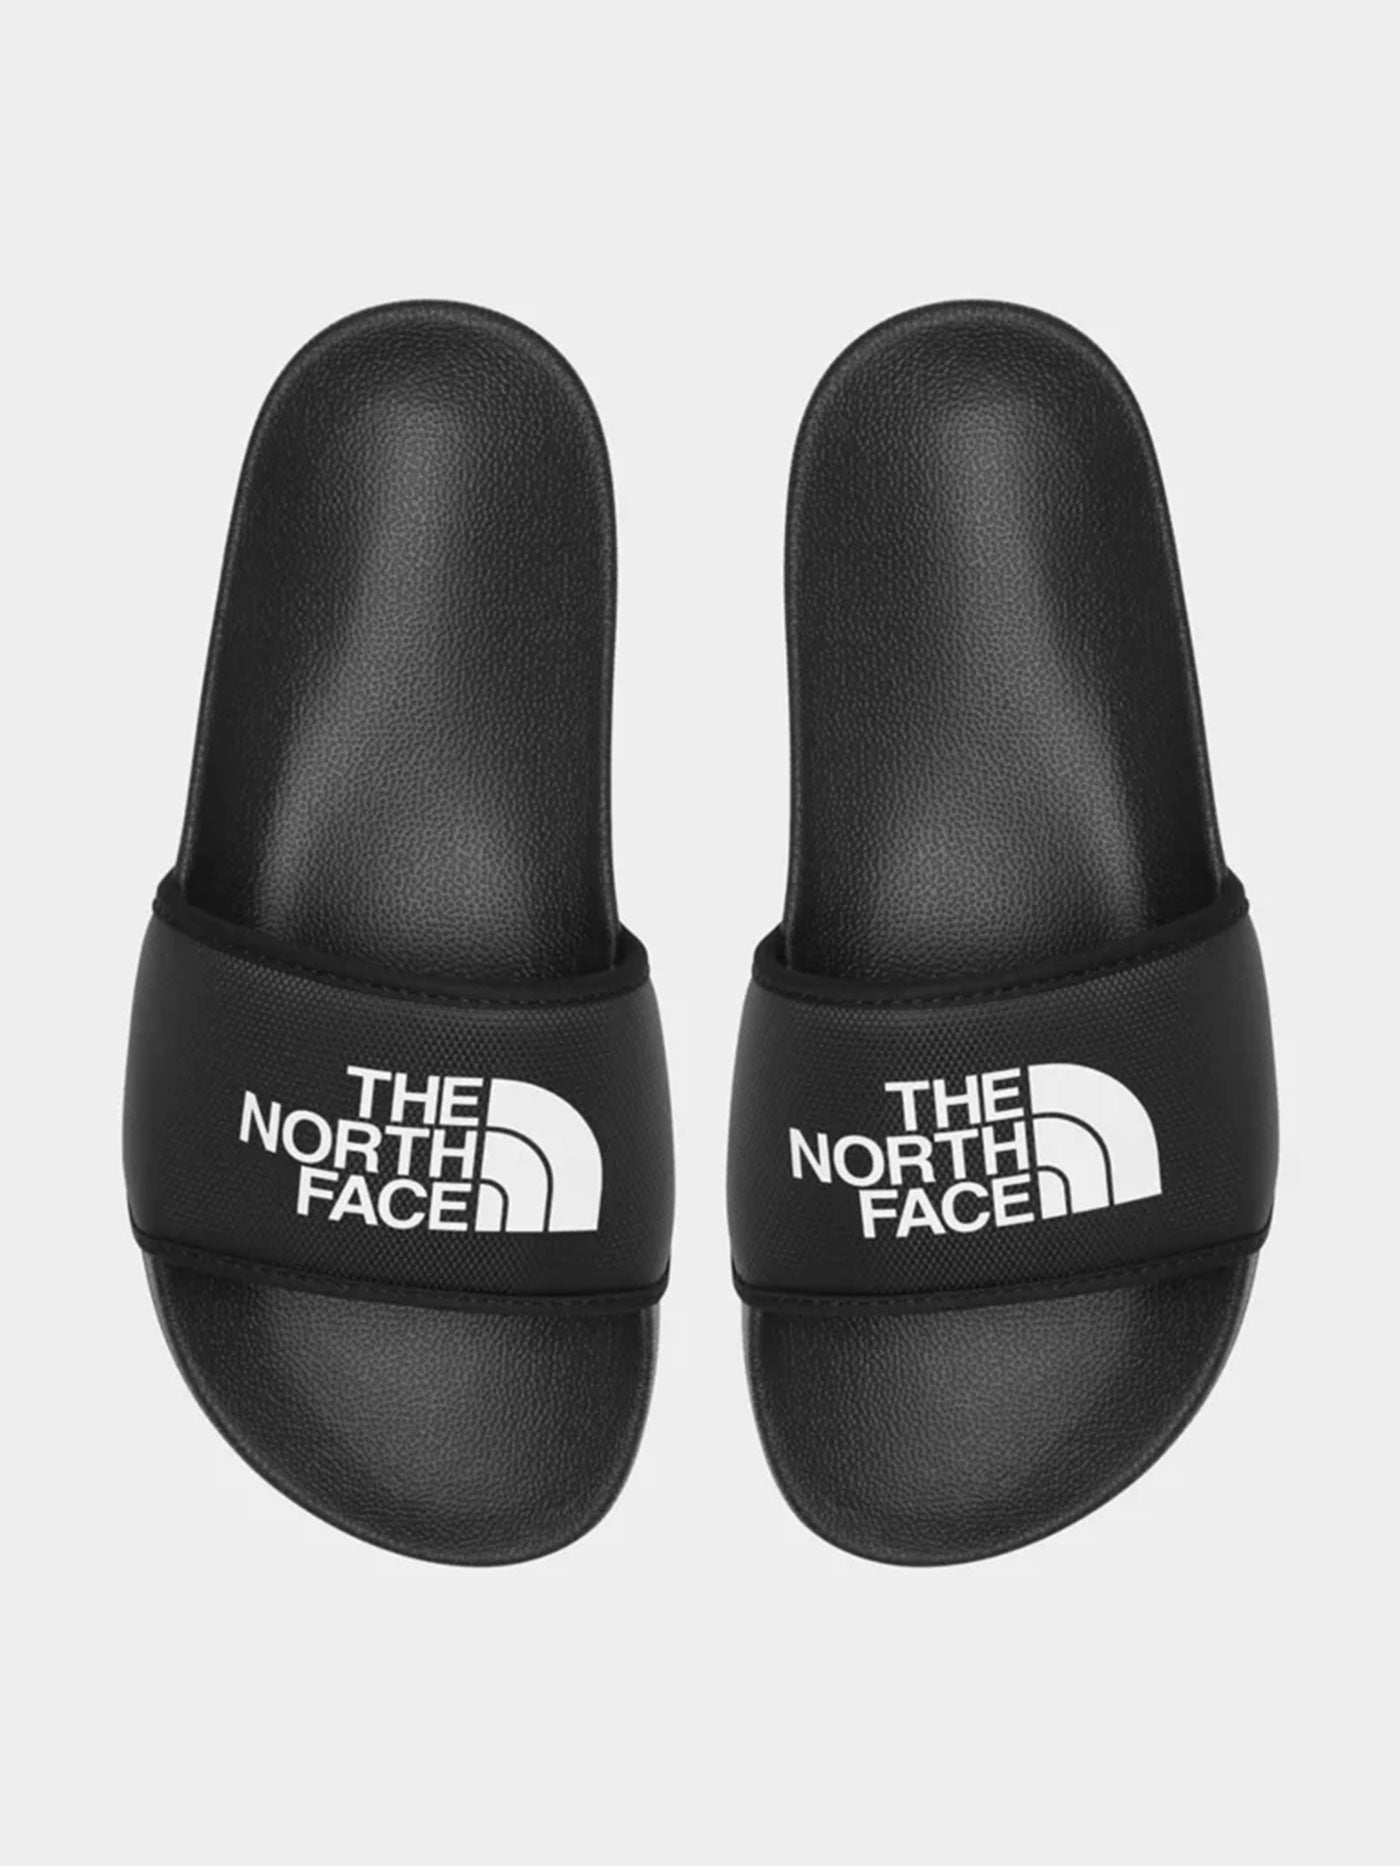 The North Face Base Camp Slide III Sandals